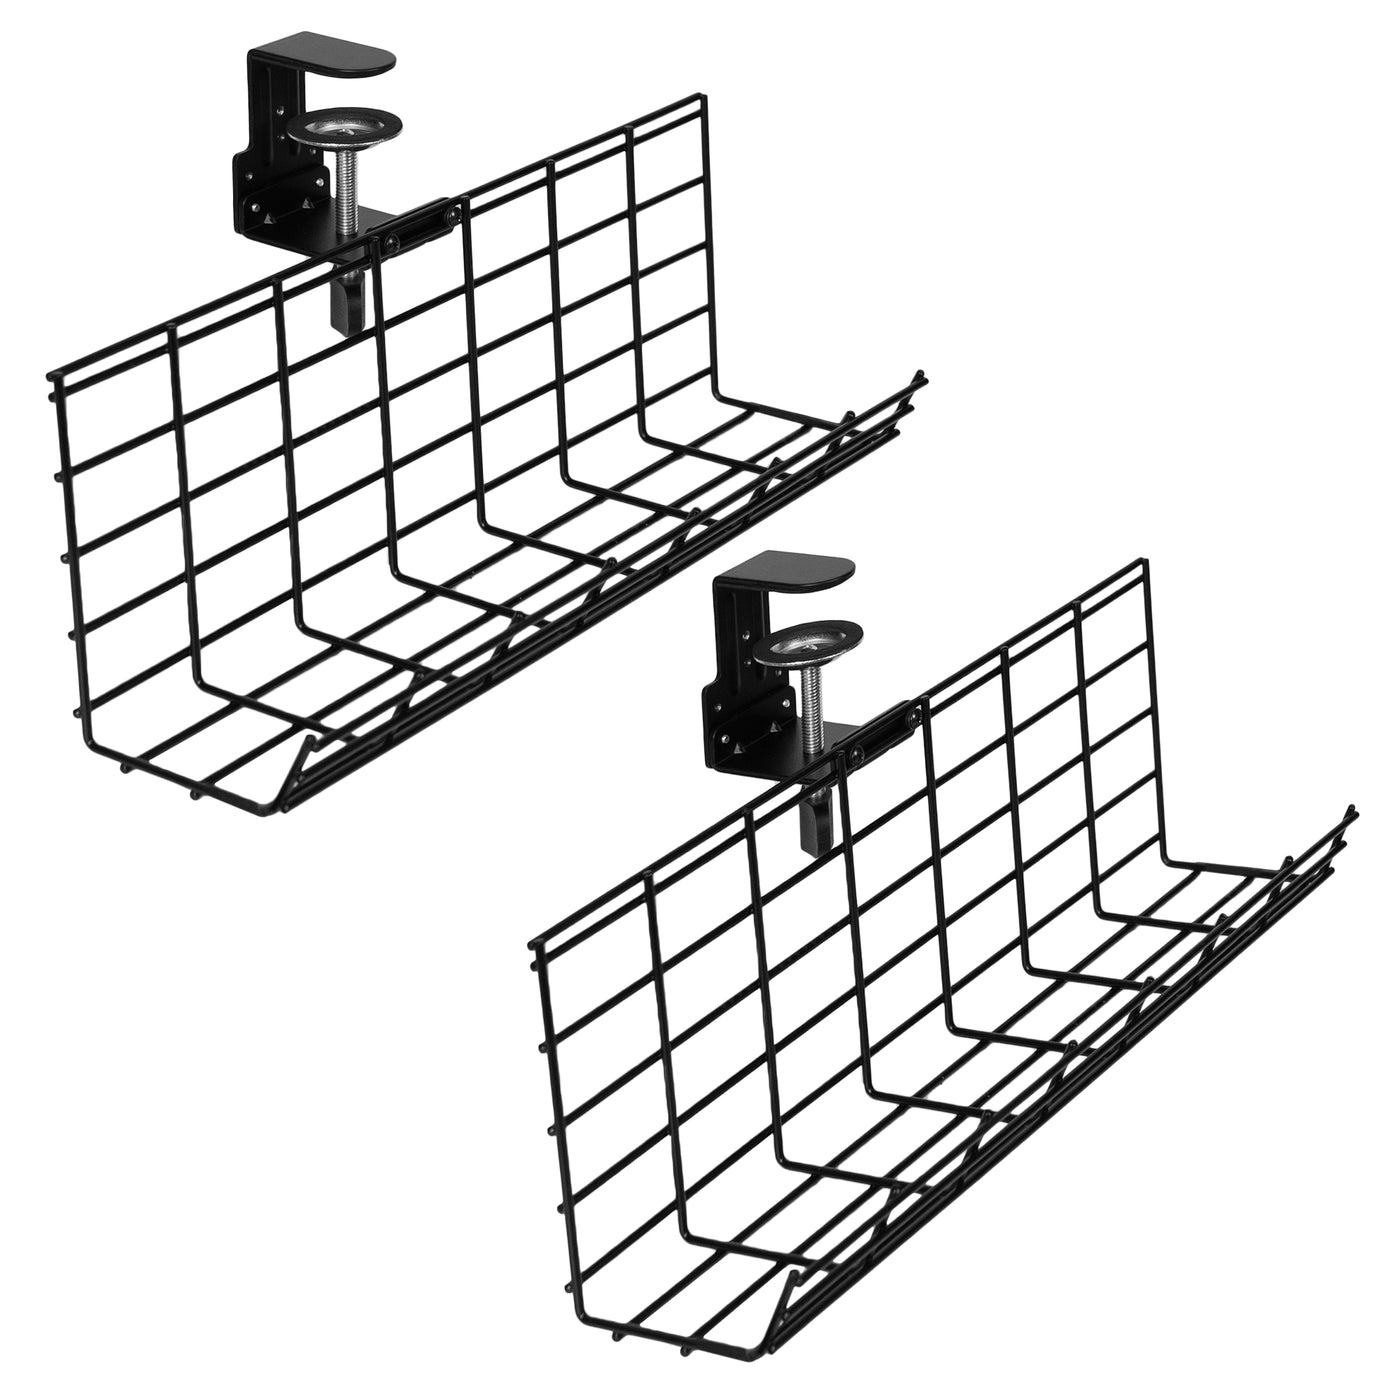 What cable tray do yall recommend because I spent the last day using the  StarTech.com 2x2in Server Rack and my ocd is forcing me to restart because  I will not be able